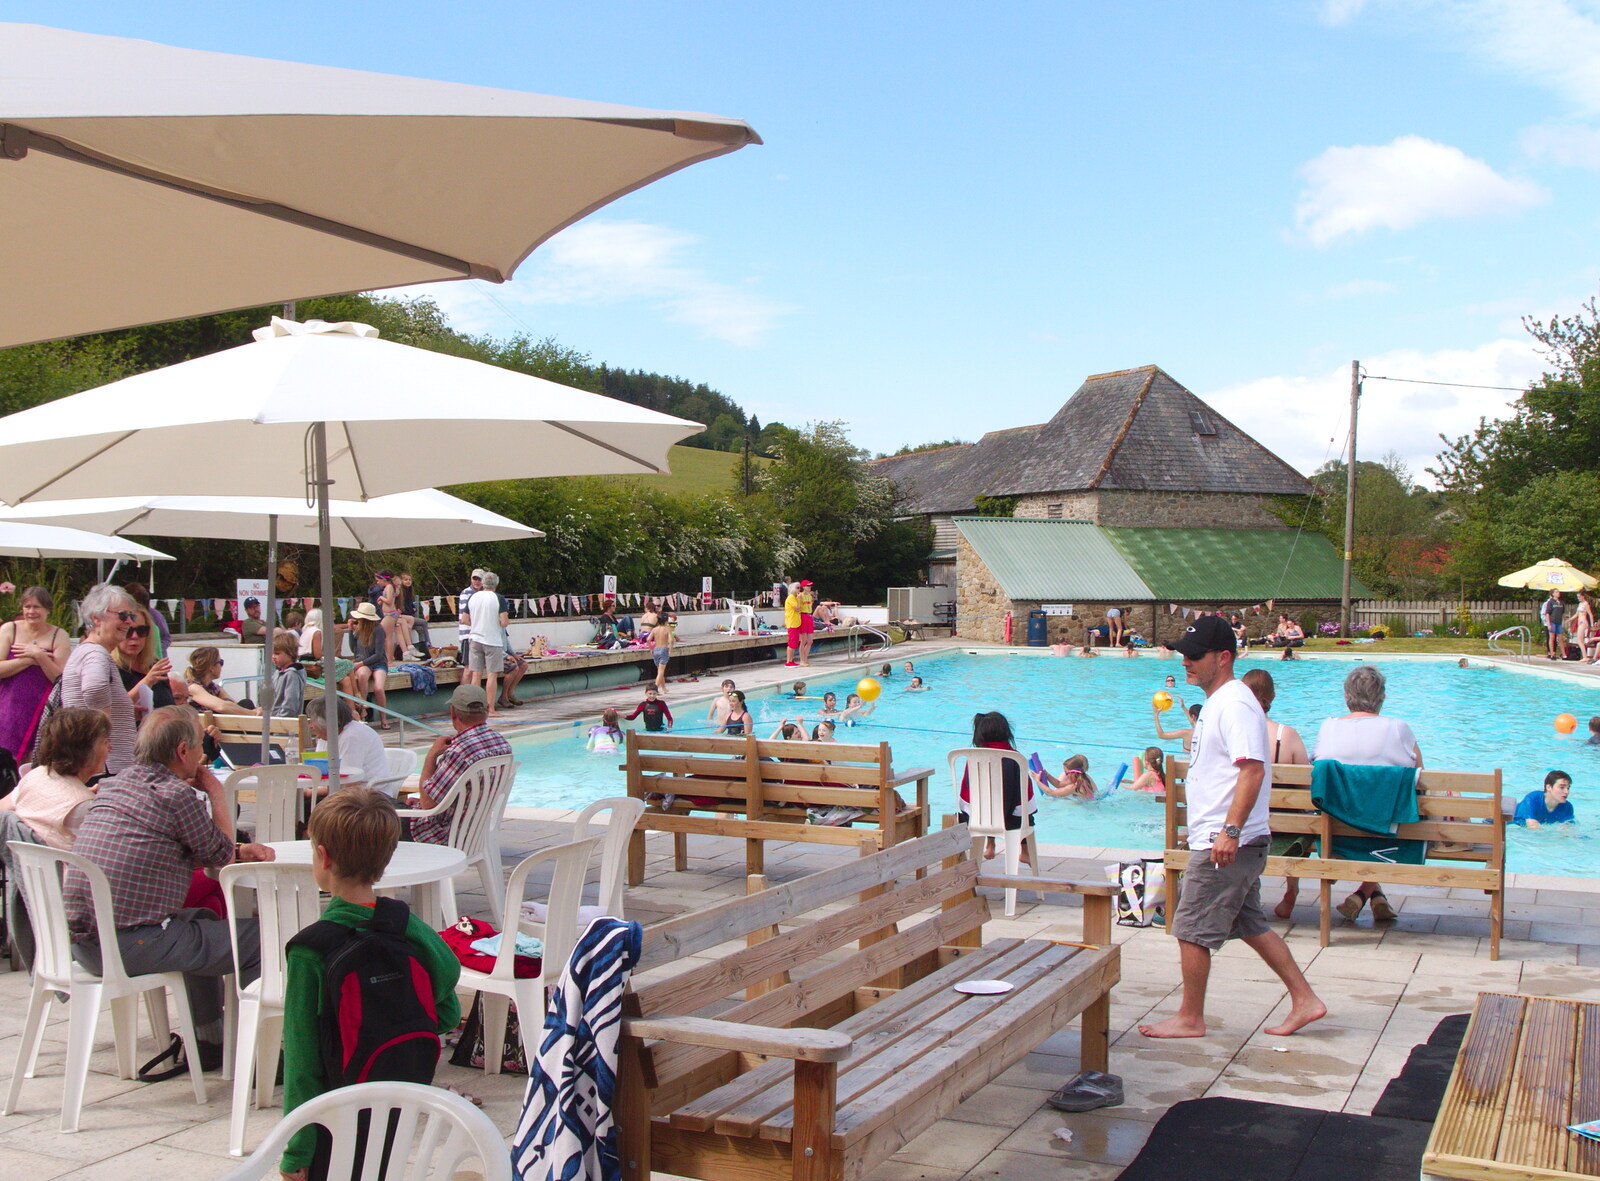 It's busy down at the Lido from Chagford Lido and a Trip to Parke, Bovey Tracey, Devon - 25th May 2019